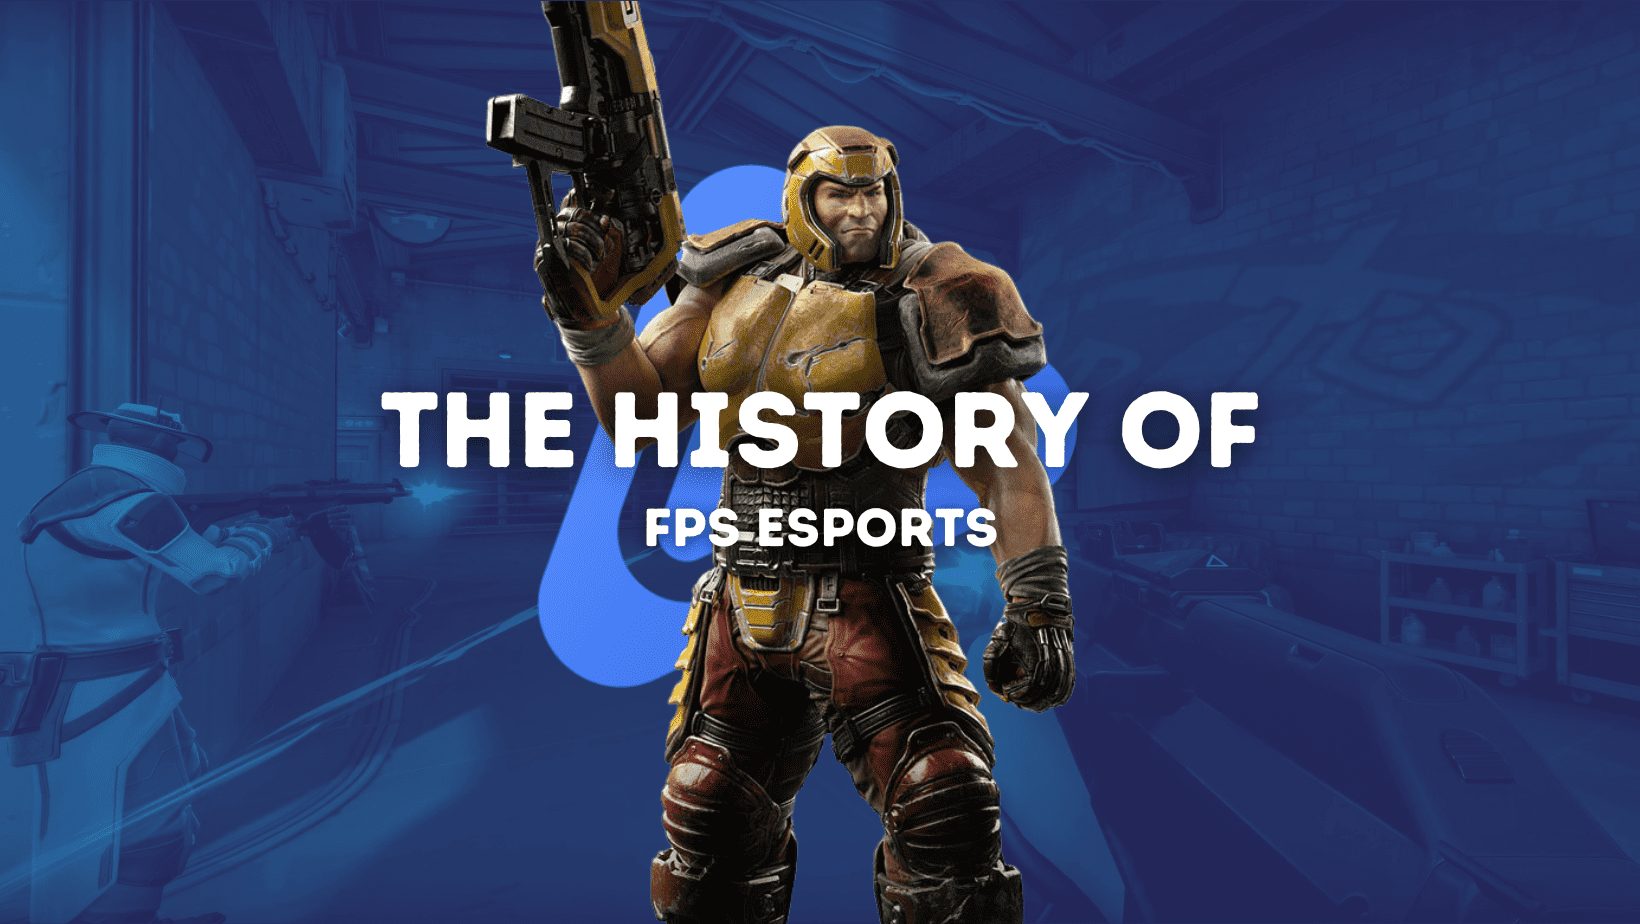 The History of FPS Esports